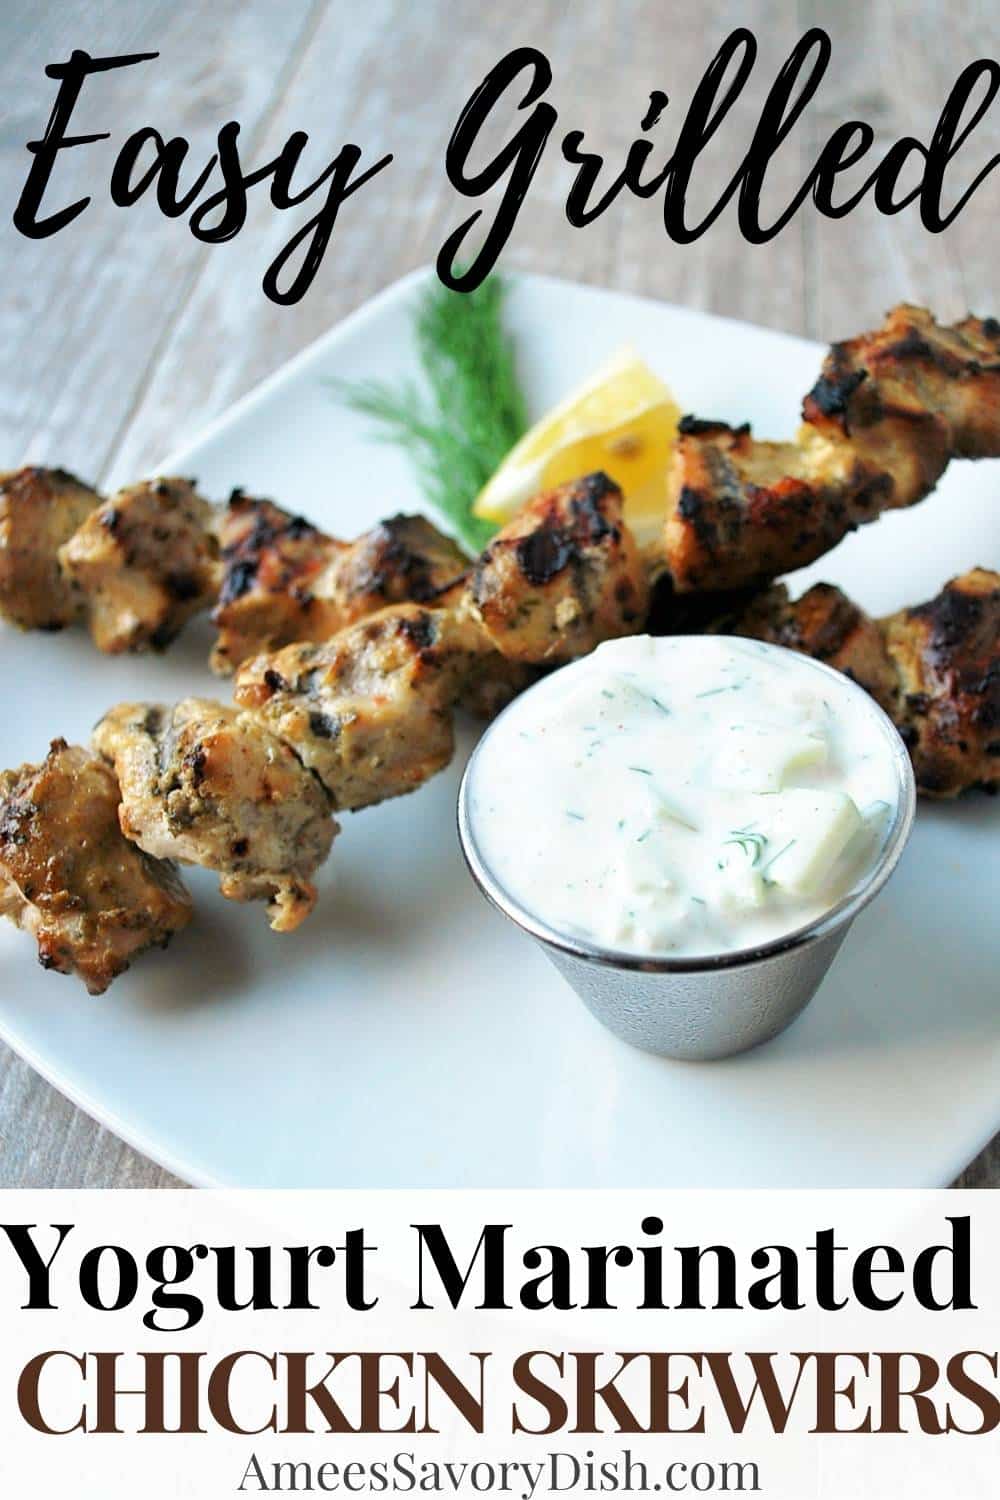 A recipe for Greek yogurt marinated chicken skewers resulting in the most flavorful and tender grilled chicken. Served with spicy tzatziki. via @Ameessavorydish